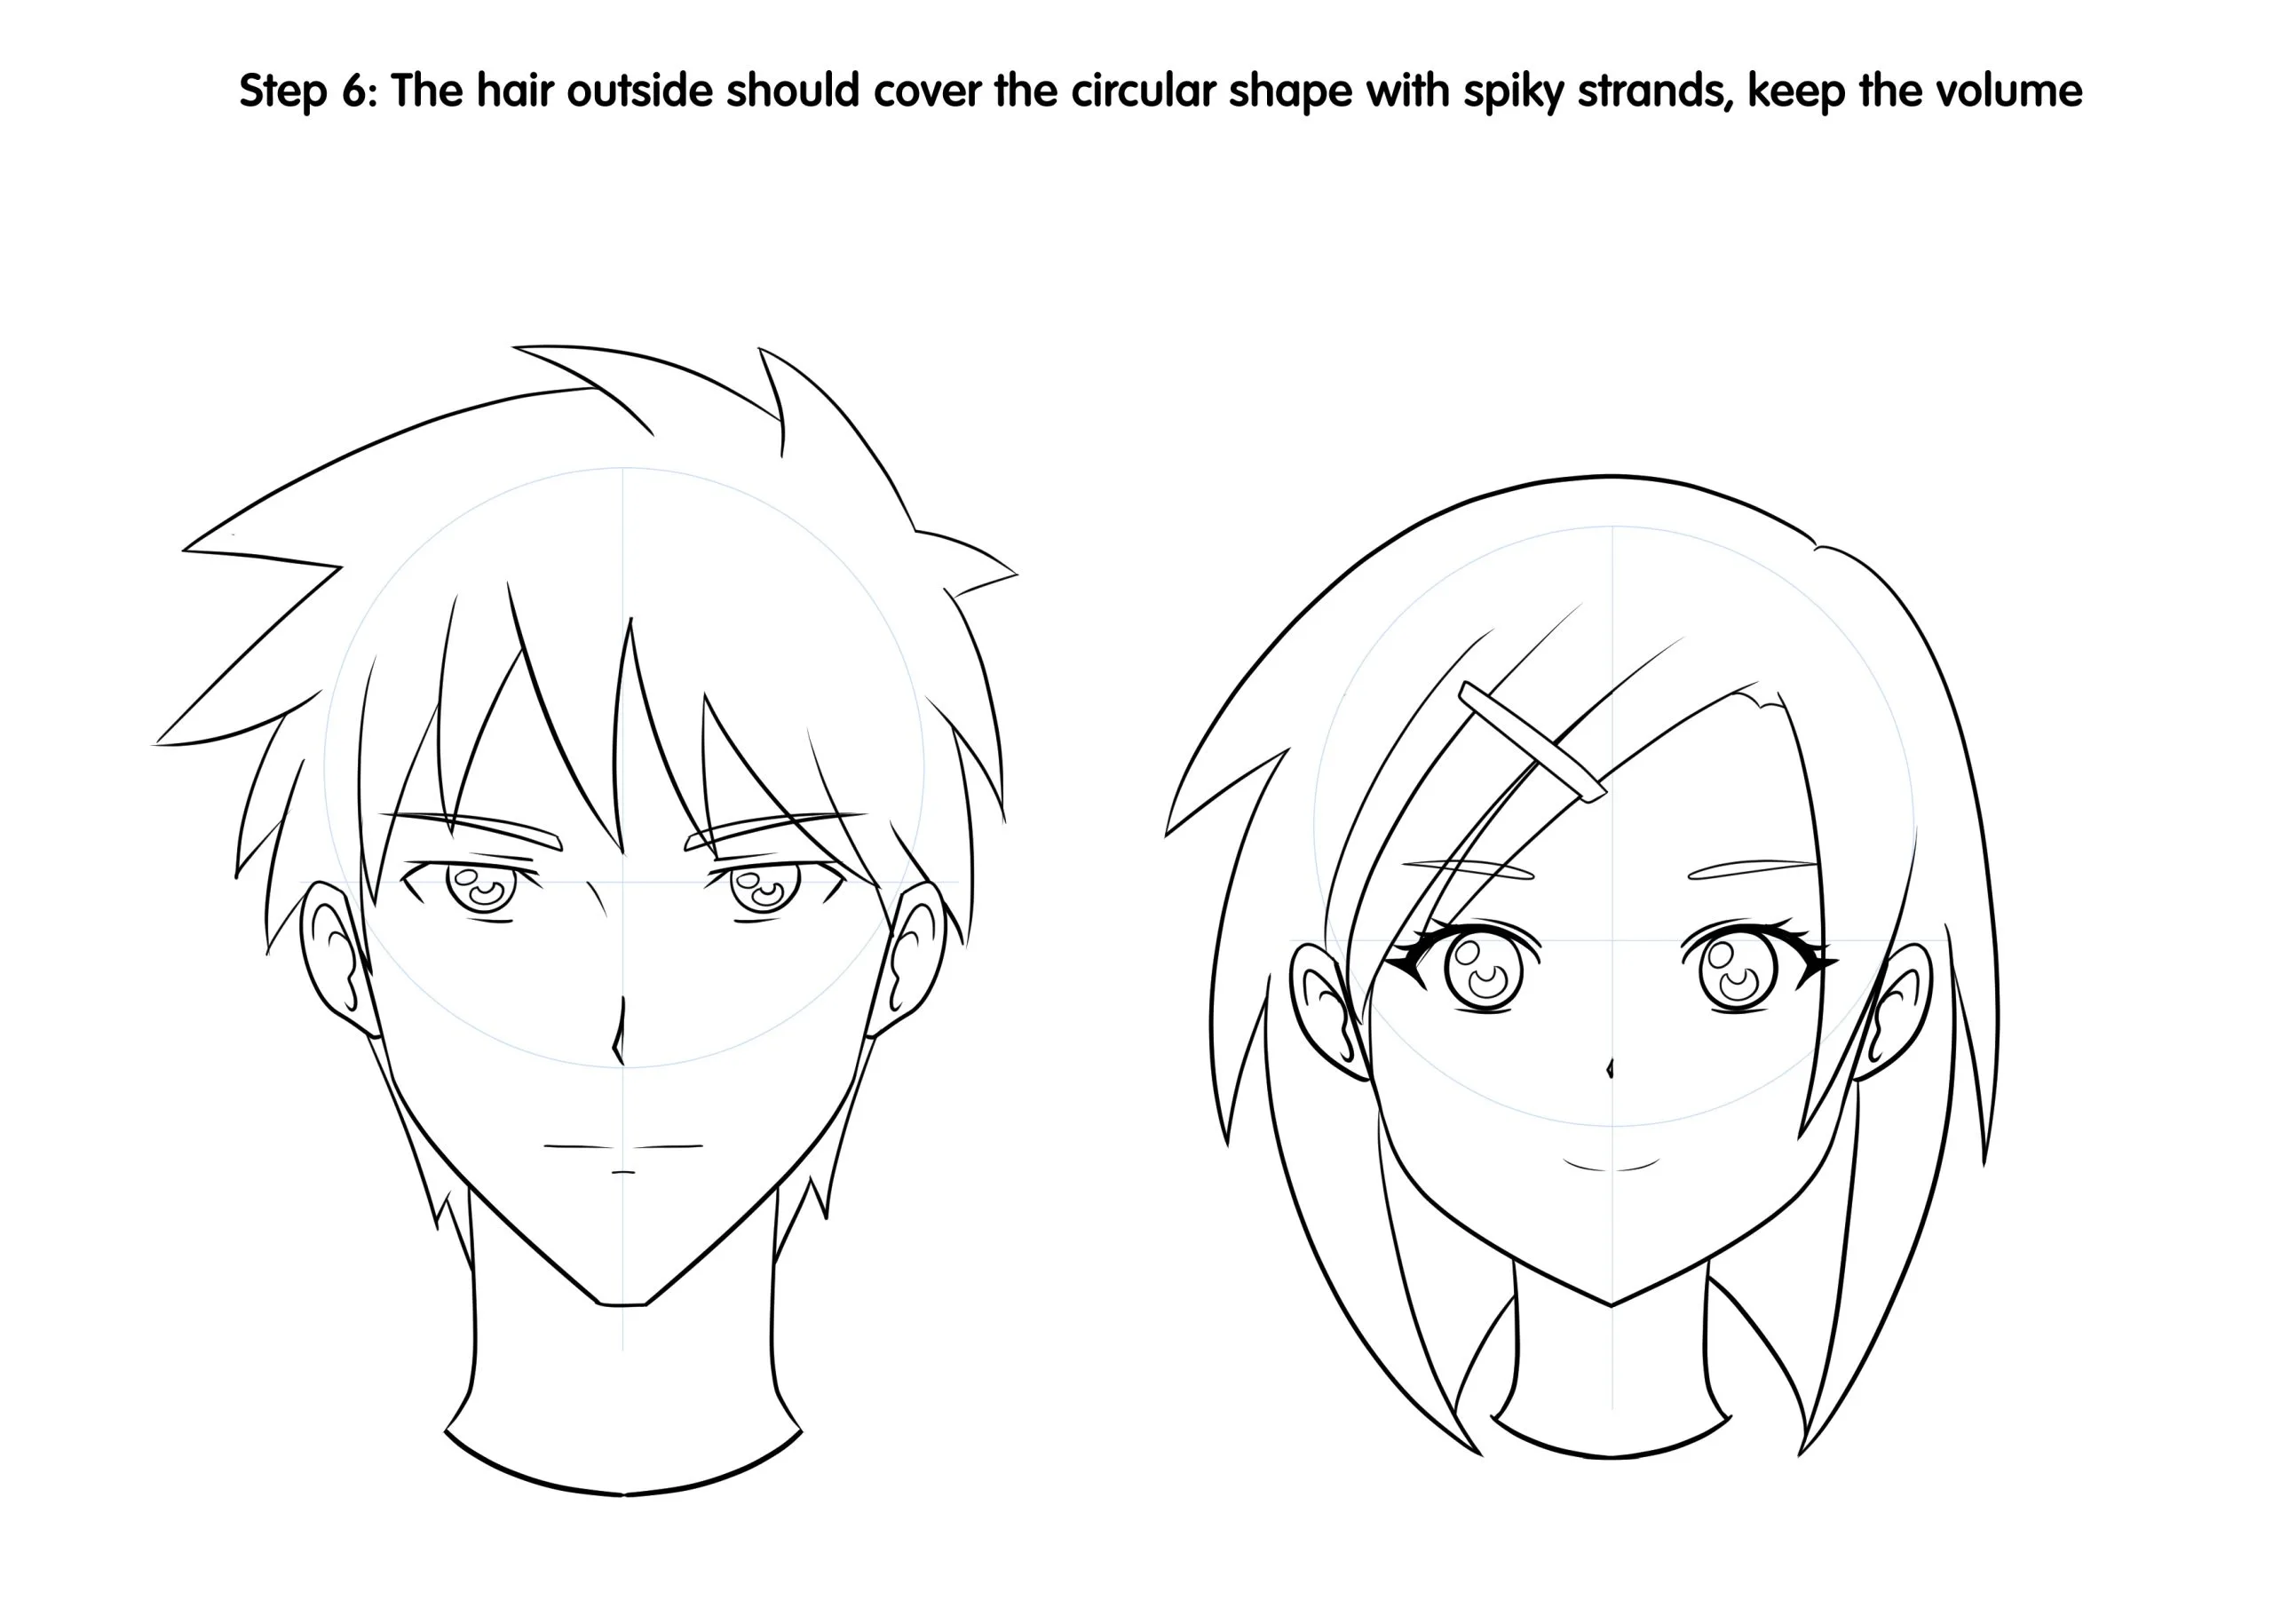 How To Draw Anime Hair Step by Step  10 Hairstyle Inspirations   Paintingcreativity